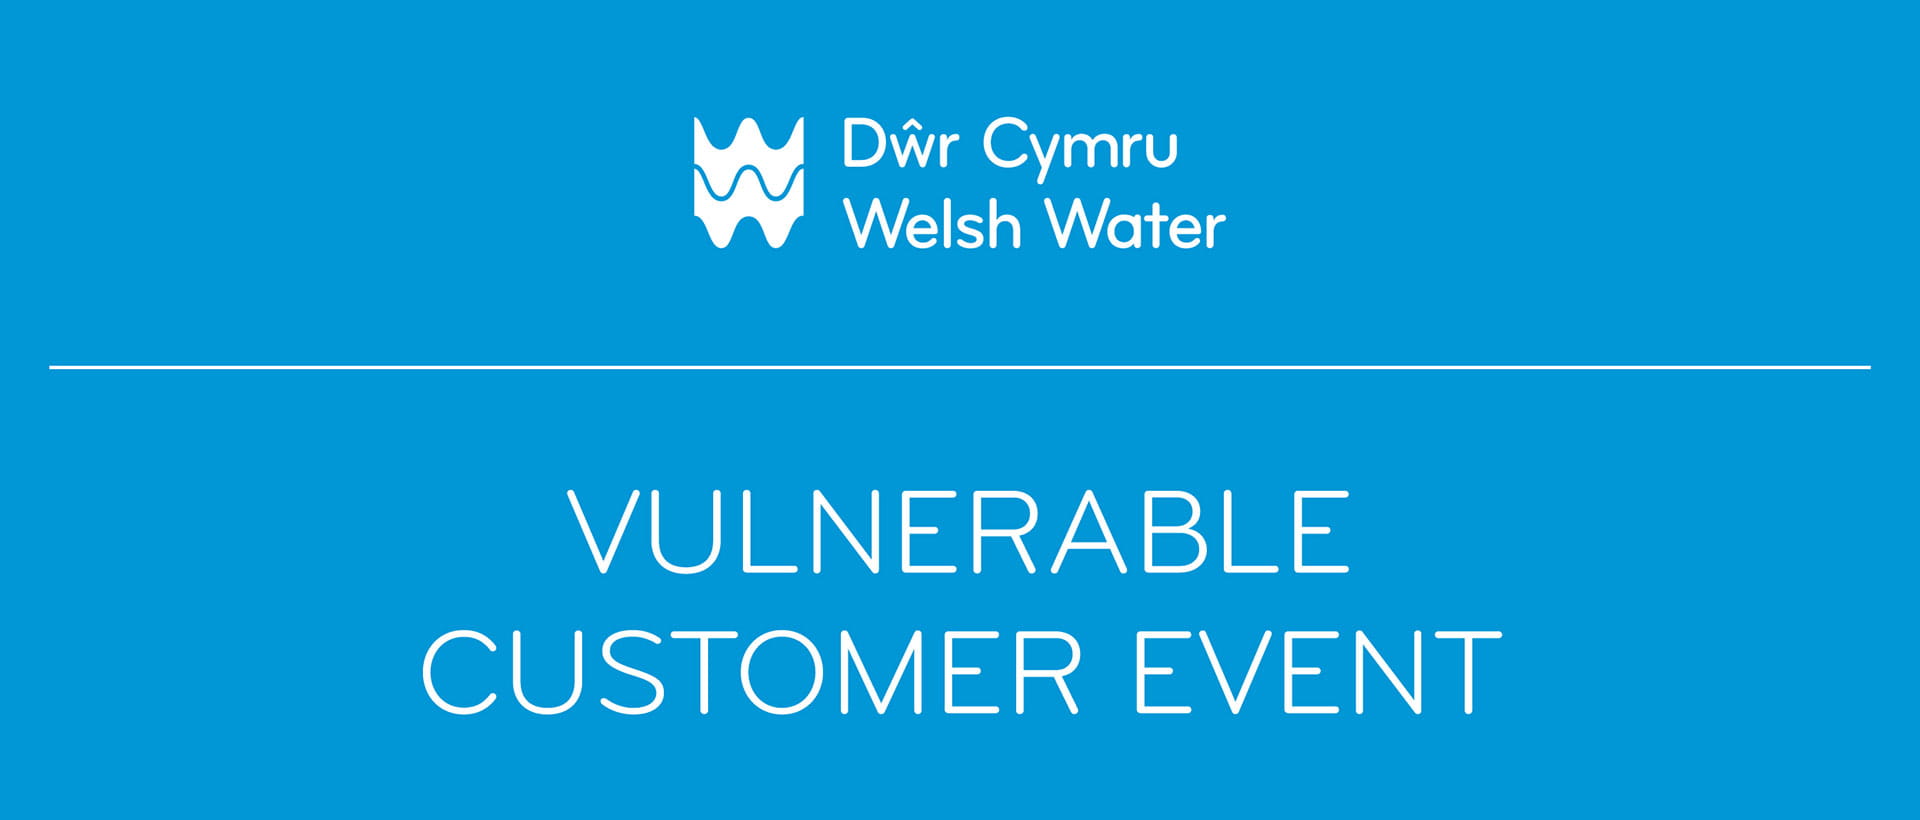 Working together to support customers in vulnerable circumstances